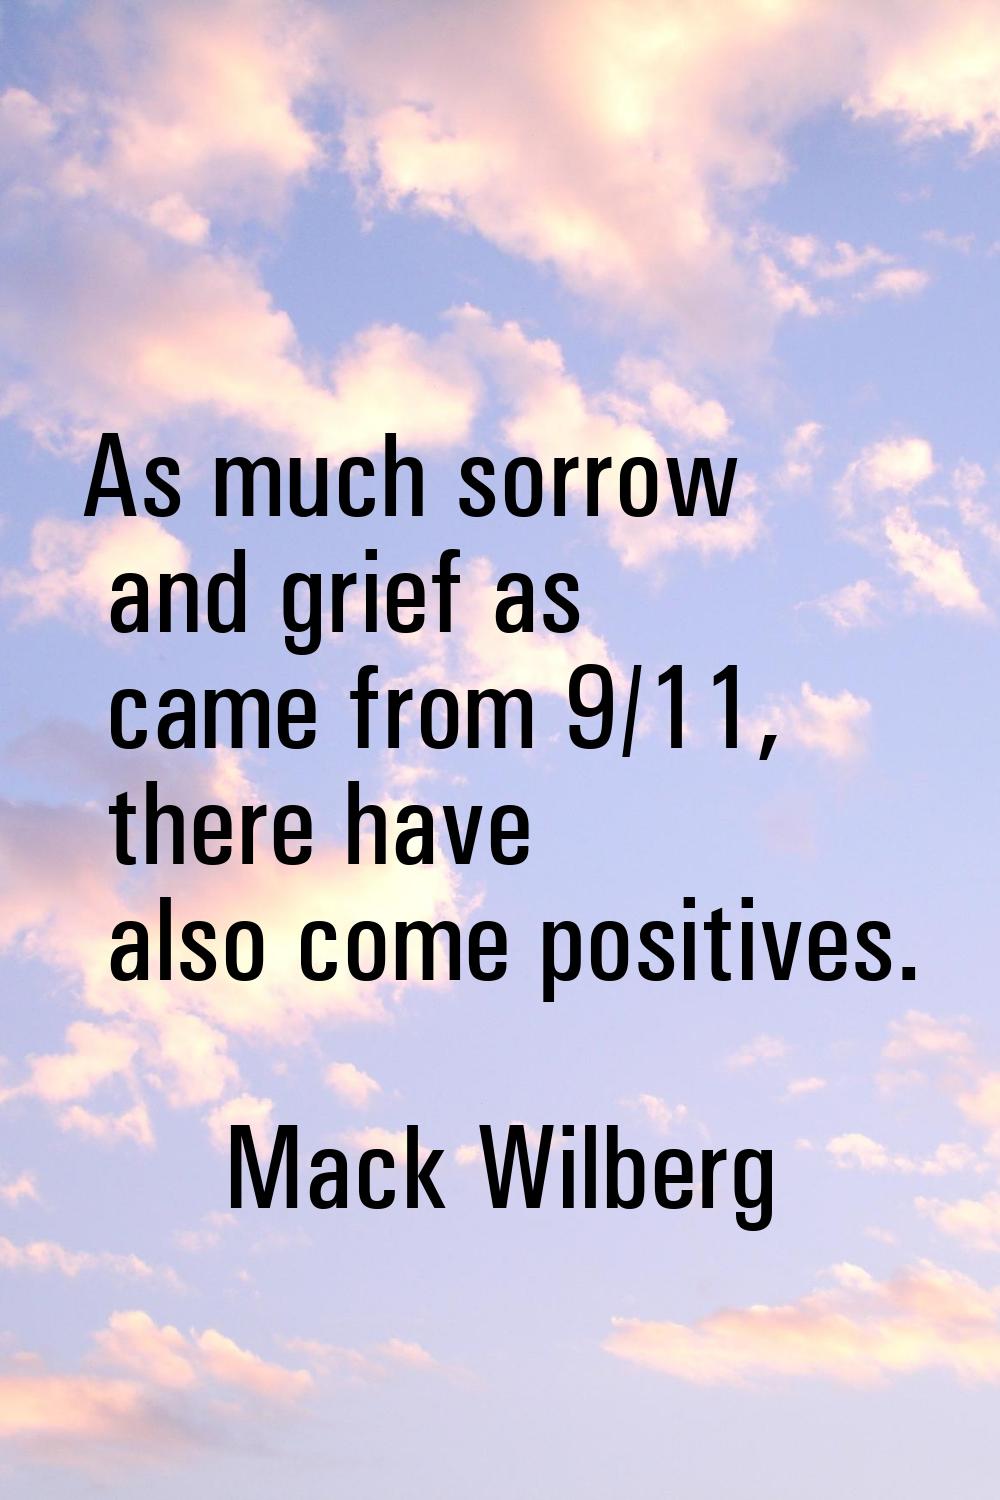 As much sorrow and grief as came from 9/11, there have also come positives.